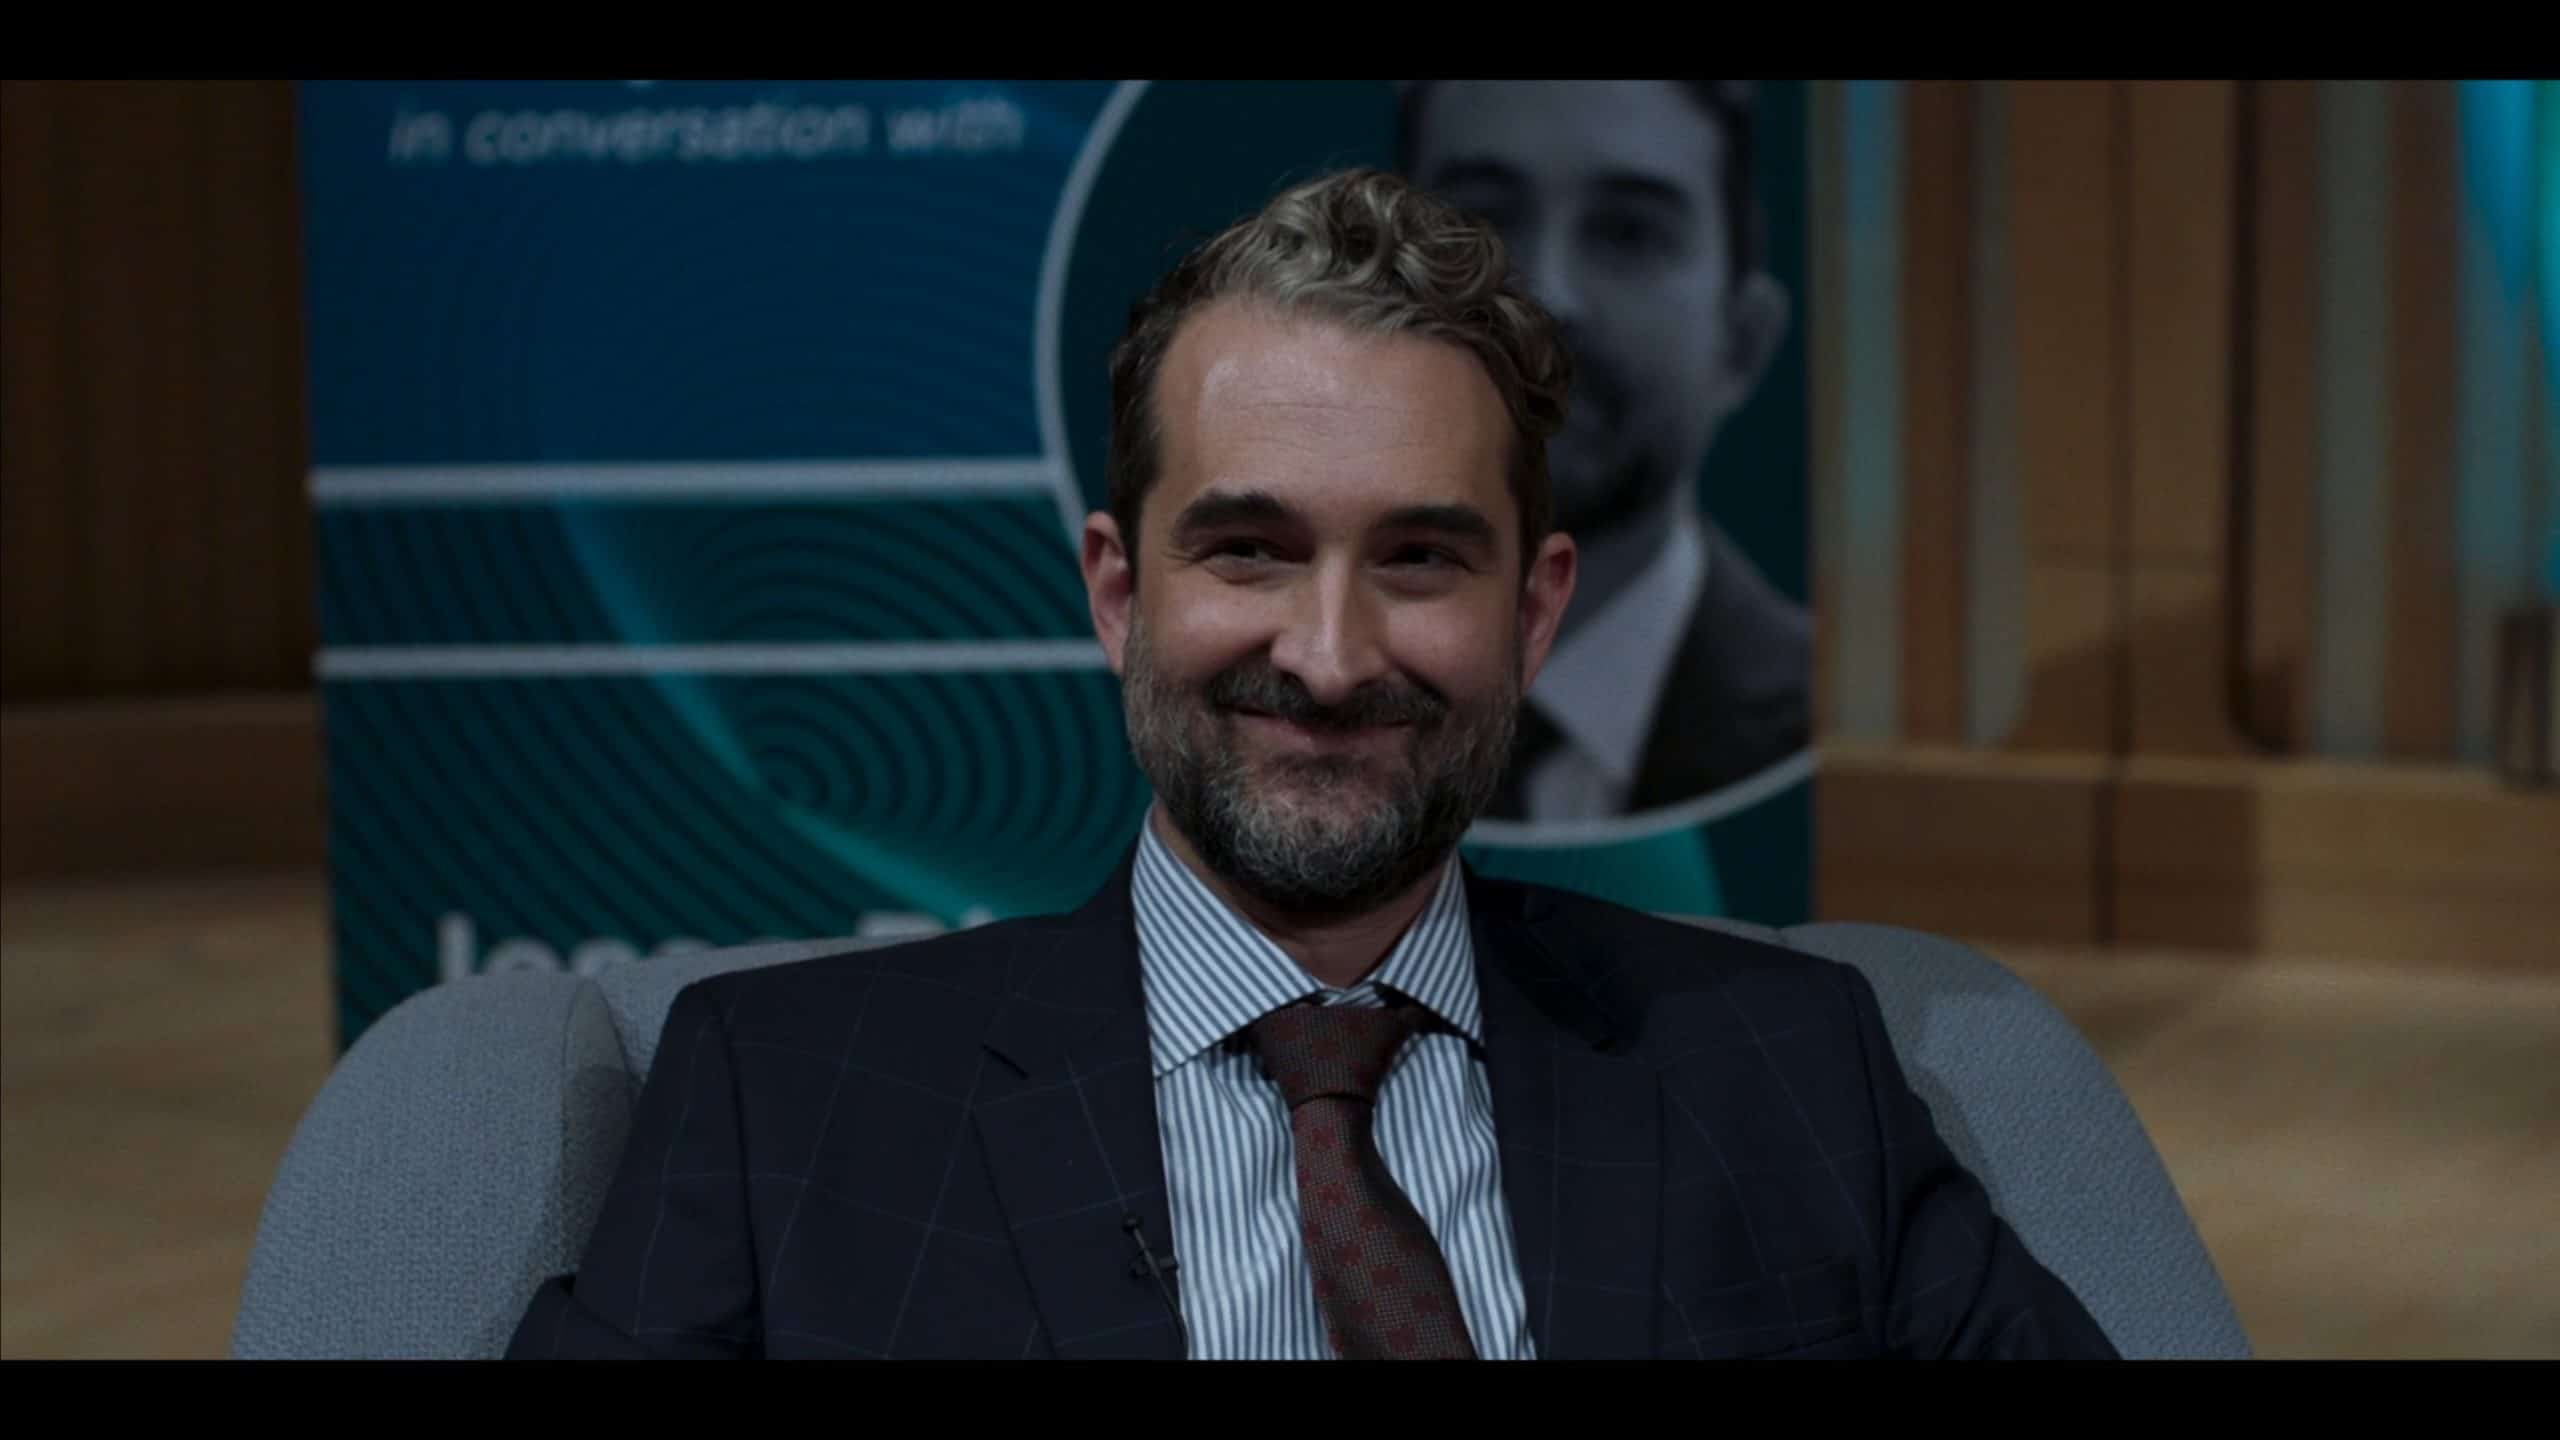 Jesse (Jay Duplass) smiling before being interviewed